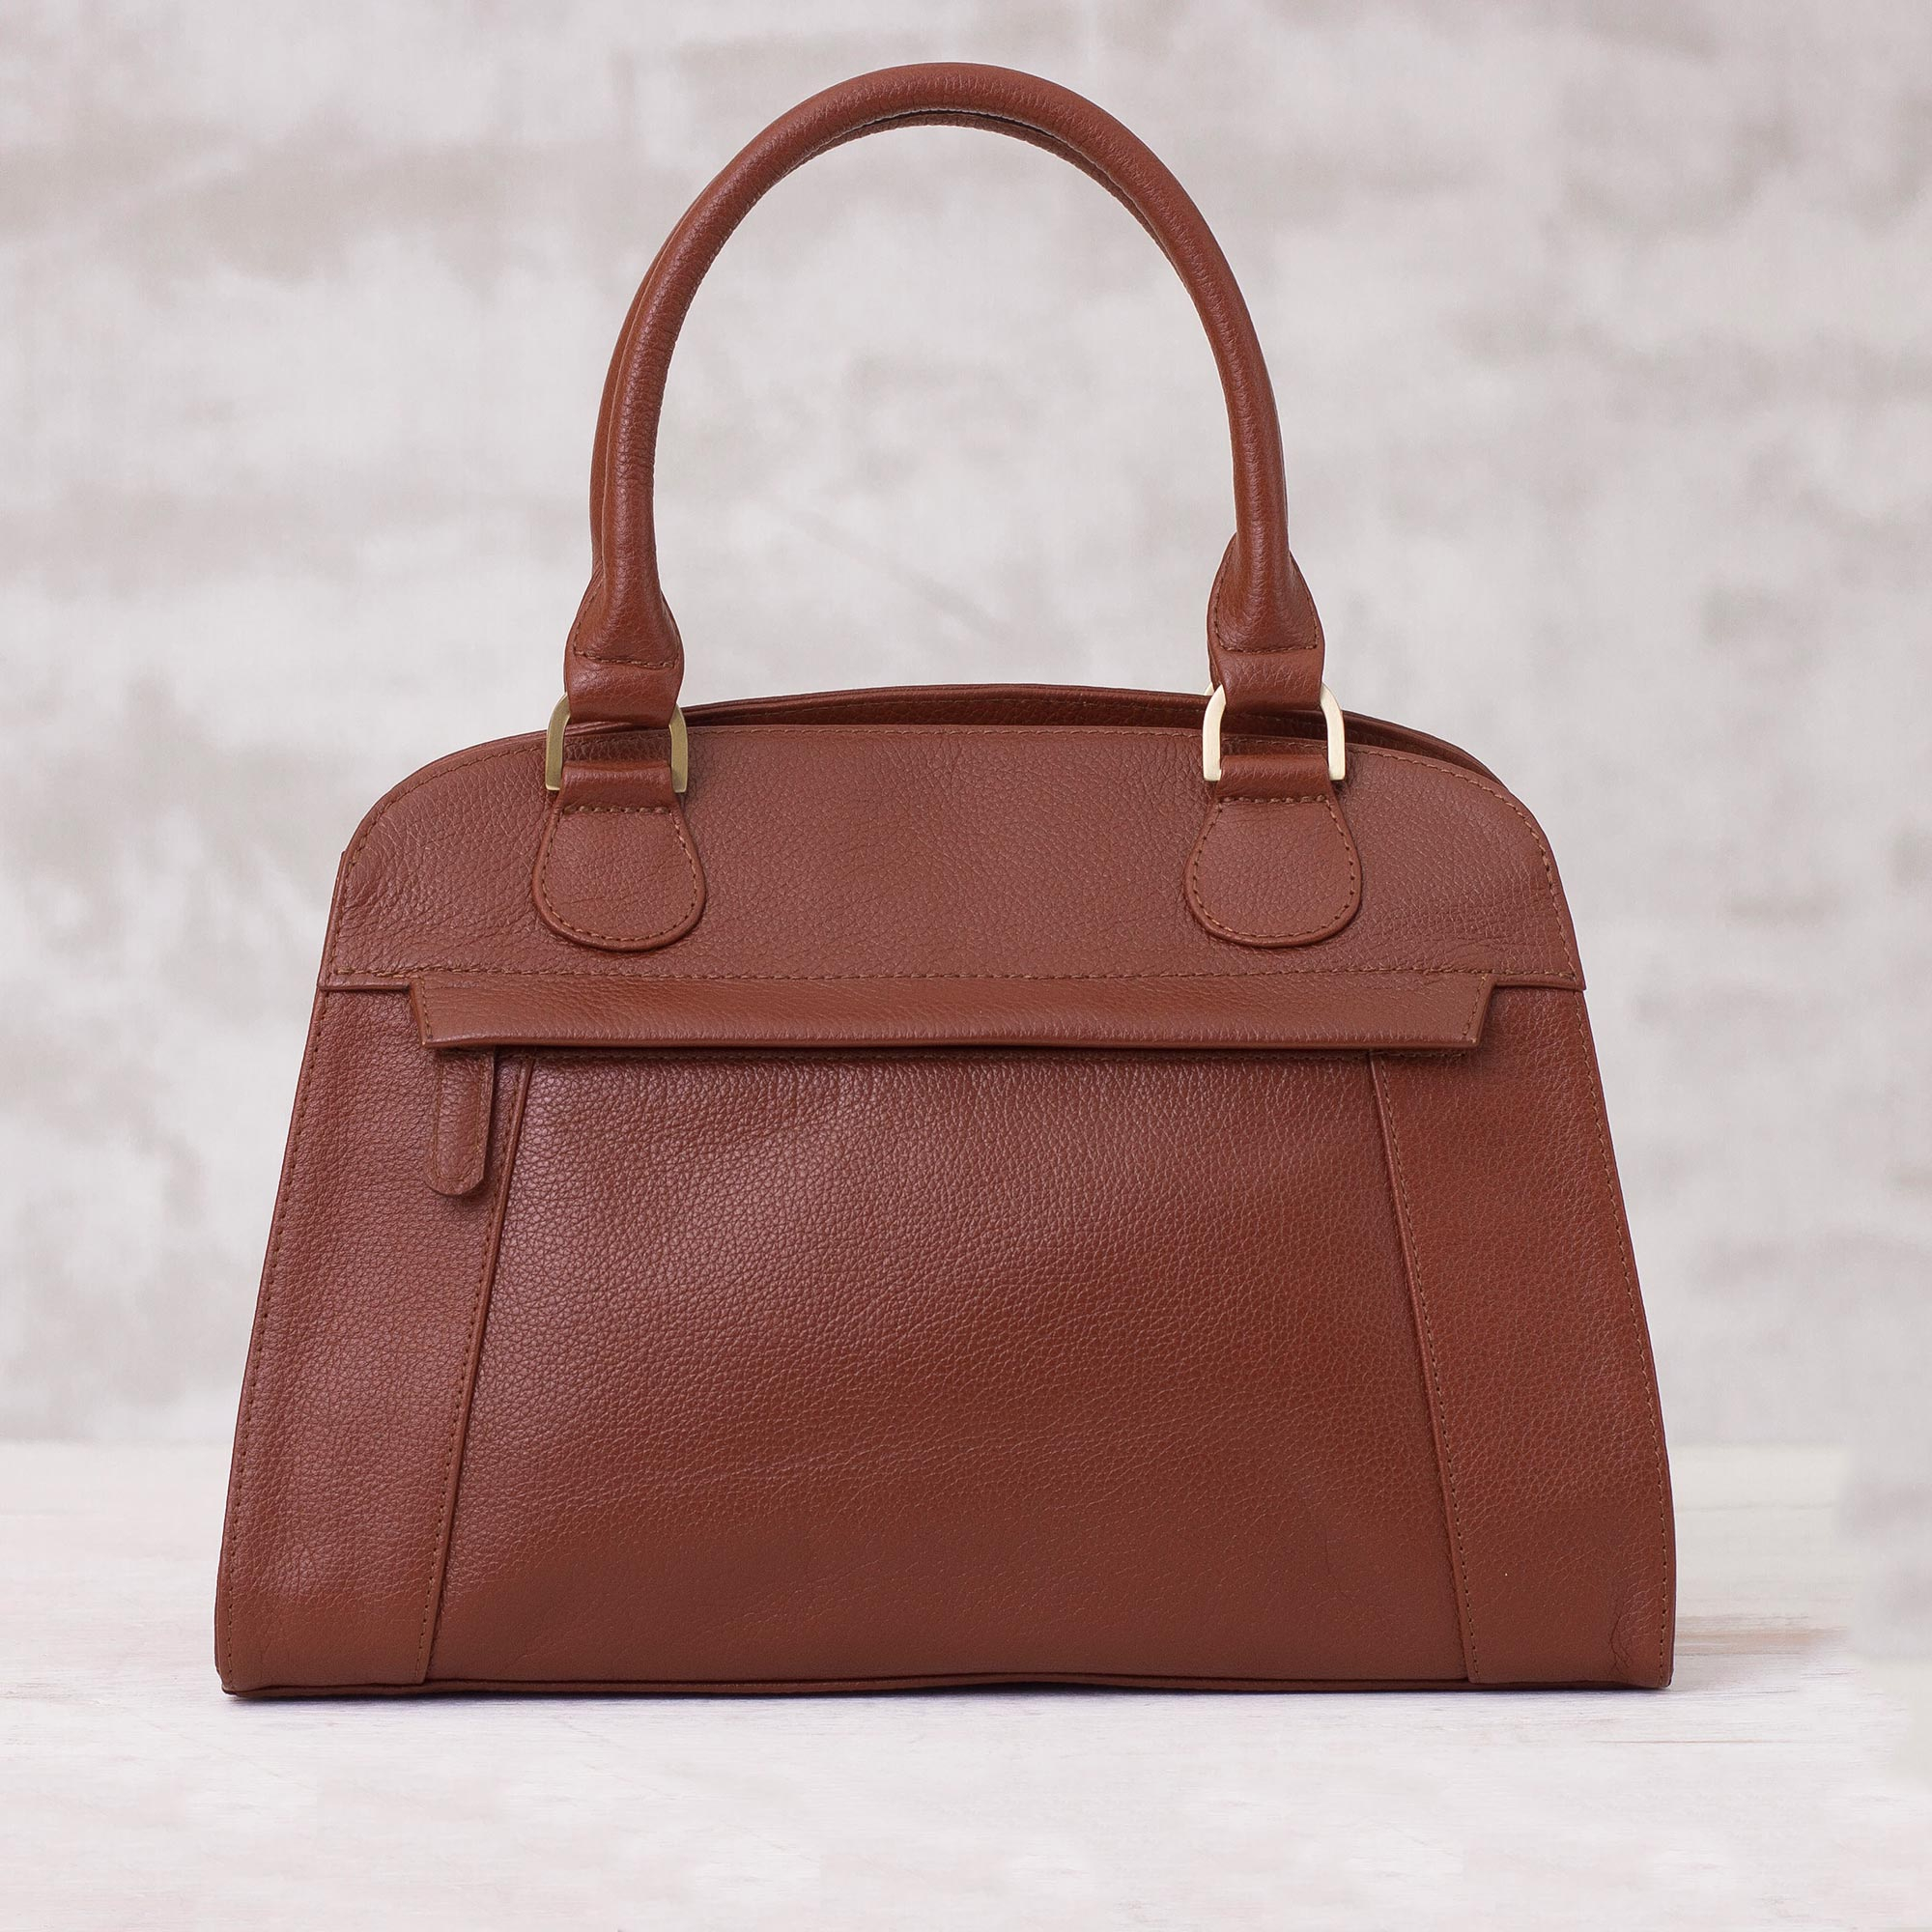 Handcrafted Leather Handle Handbag in Russet from Peru - Russet Glamour ...